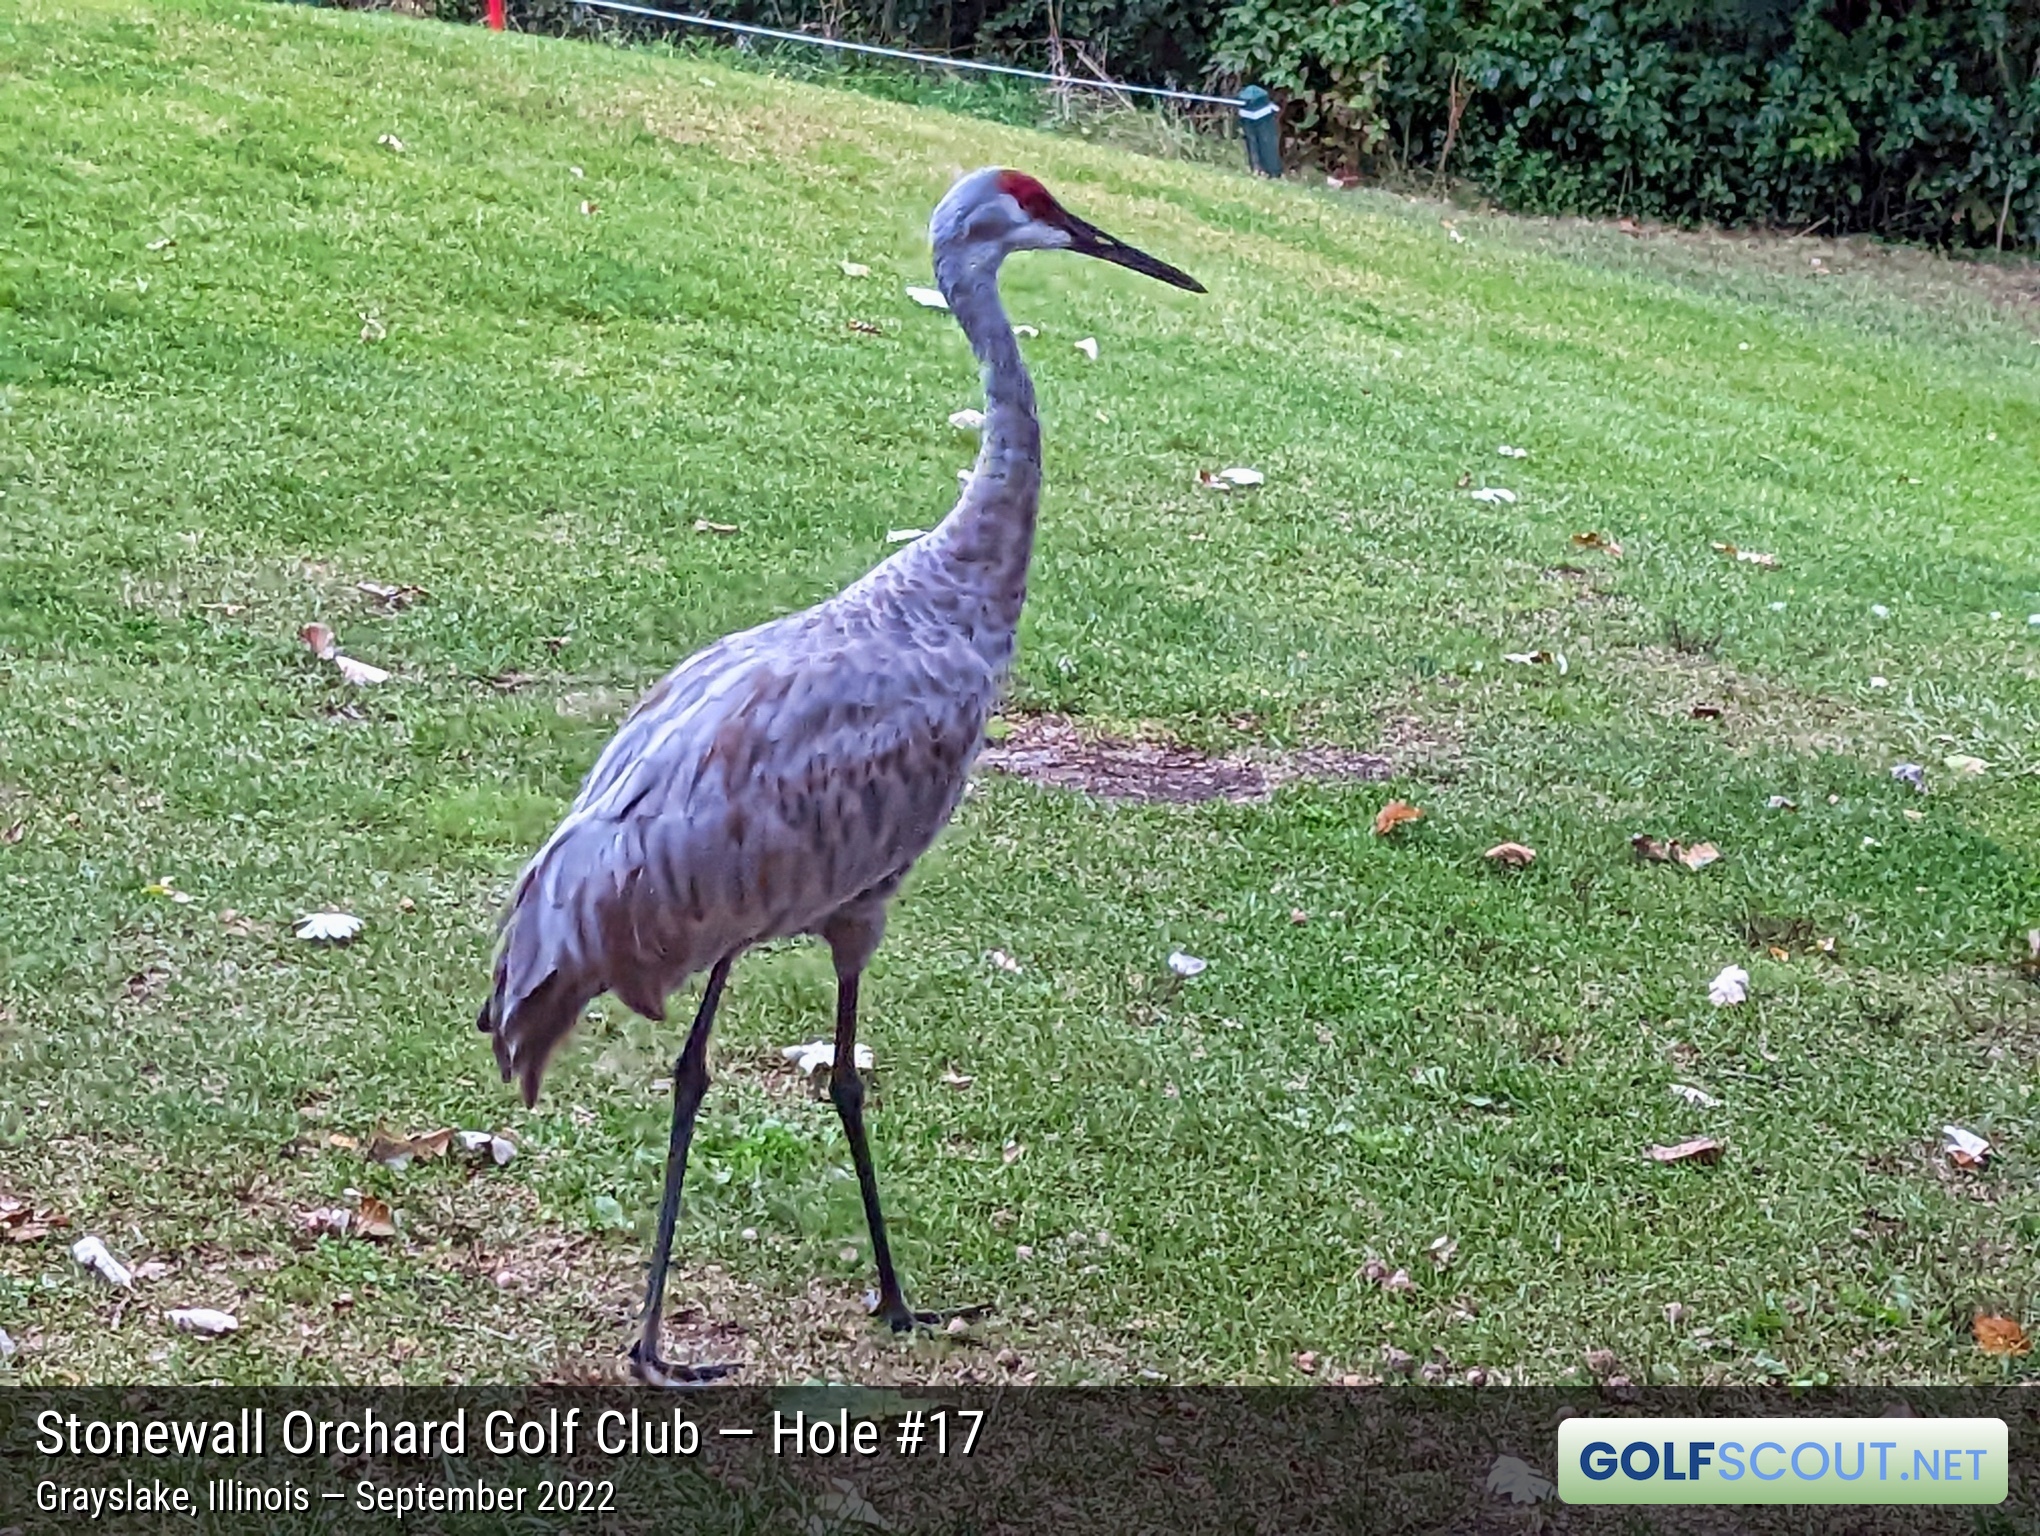 Miscellaneous photo of Stonewall Orchard Golf Club in Grayslake, Illinois. This beautiful Sandhill Crane (and 2 others) were hanging out on the 17th hole.  They let us get surprisingly close for photos!